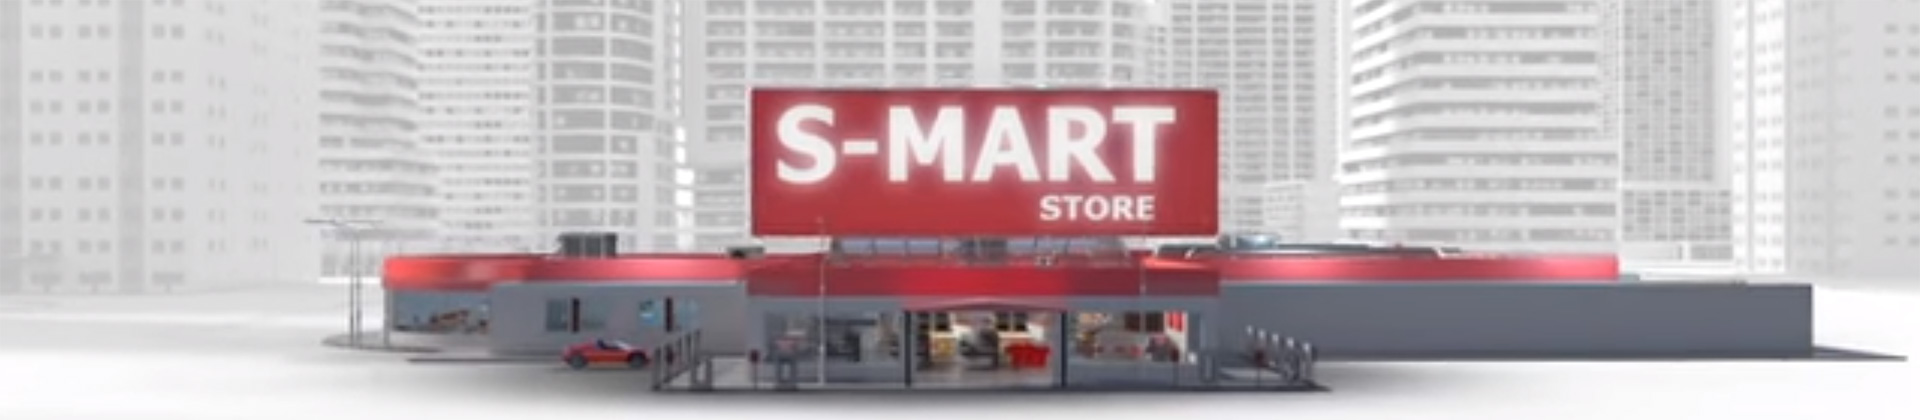 Front image of the "s-mart" a smart supermarket packed with Danfoss energy efficiency solutions